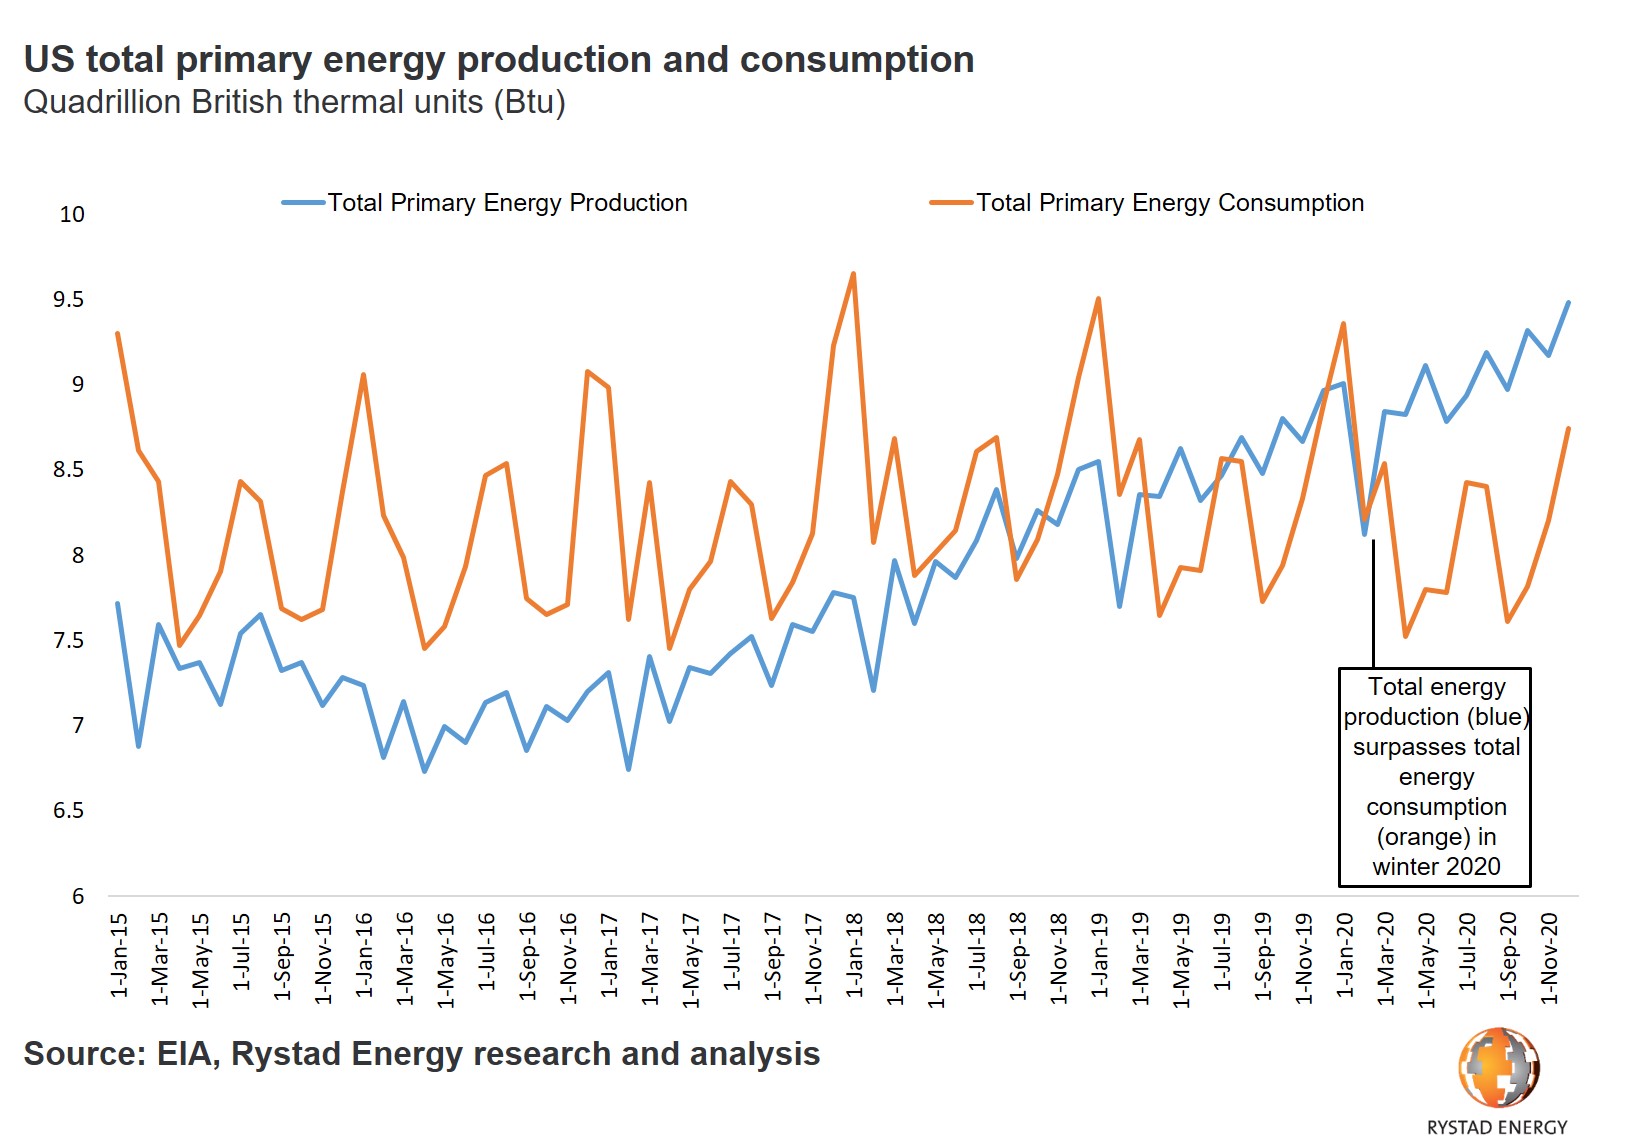 20191126_PR Chart US total primary energy production and consumption.jpg